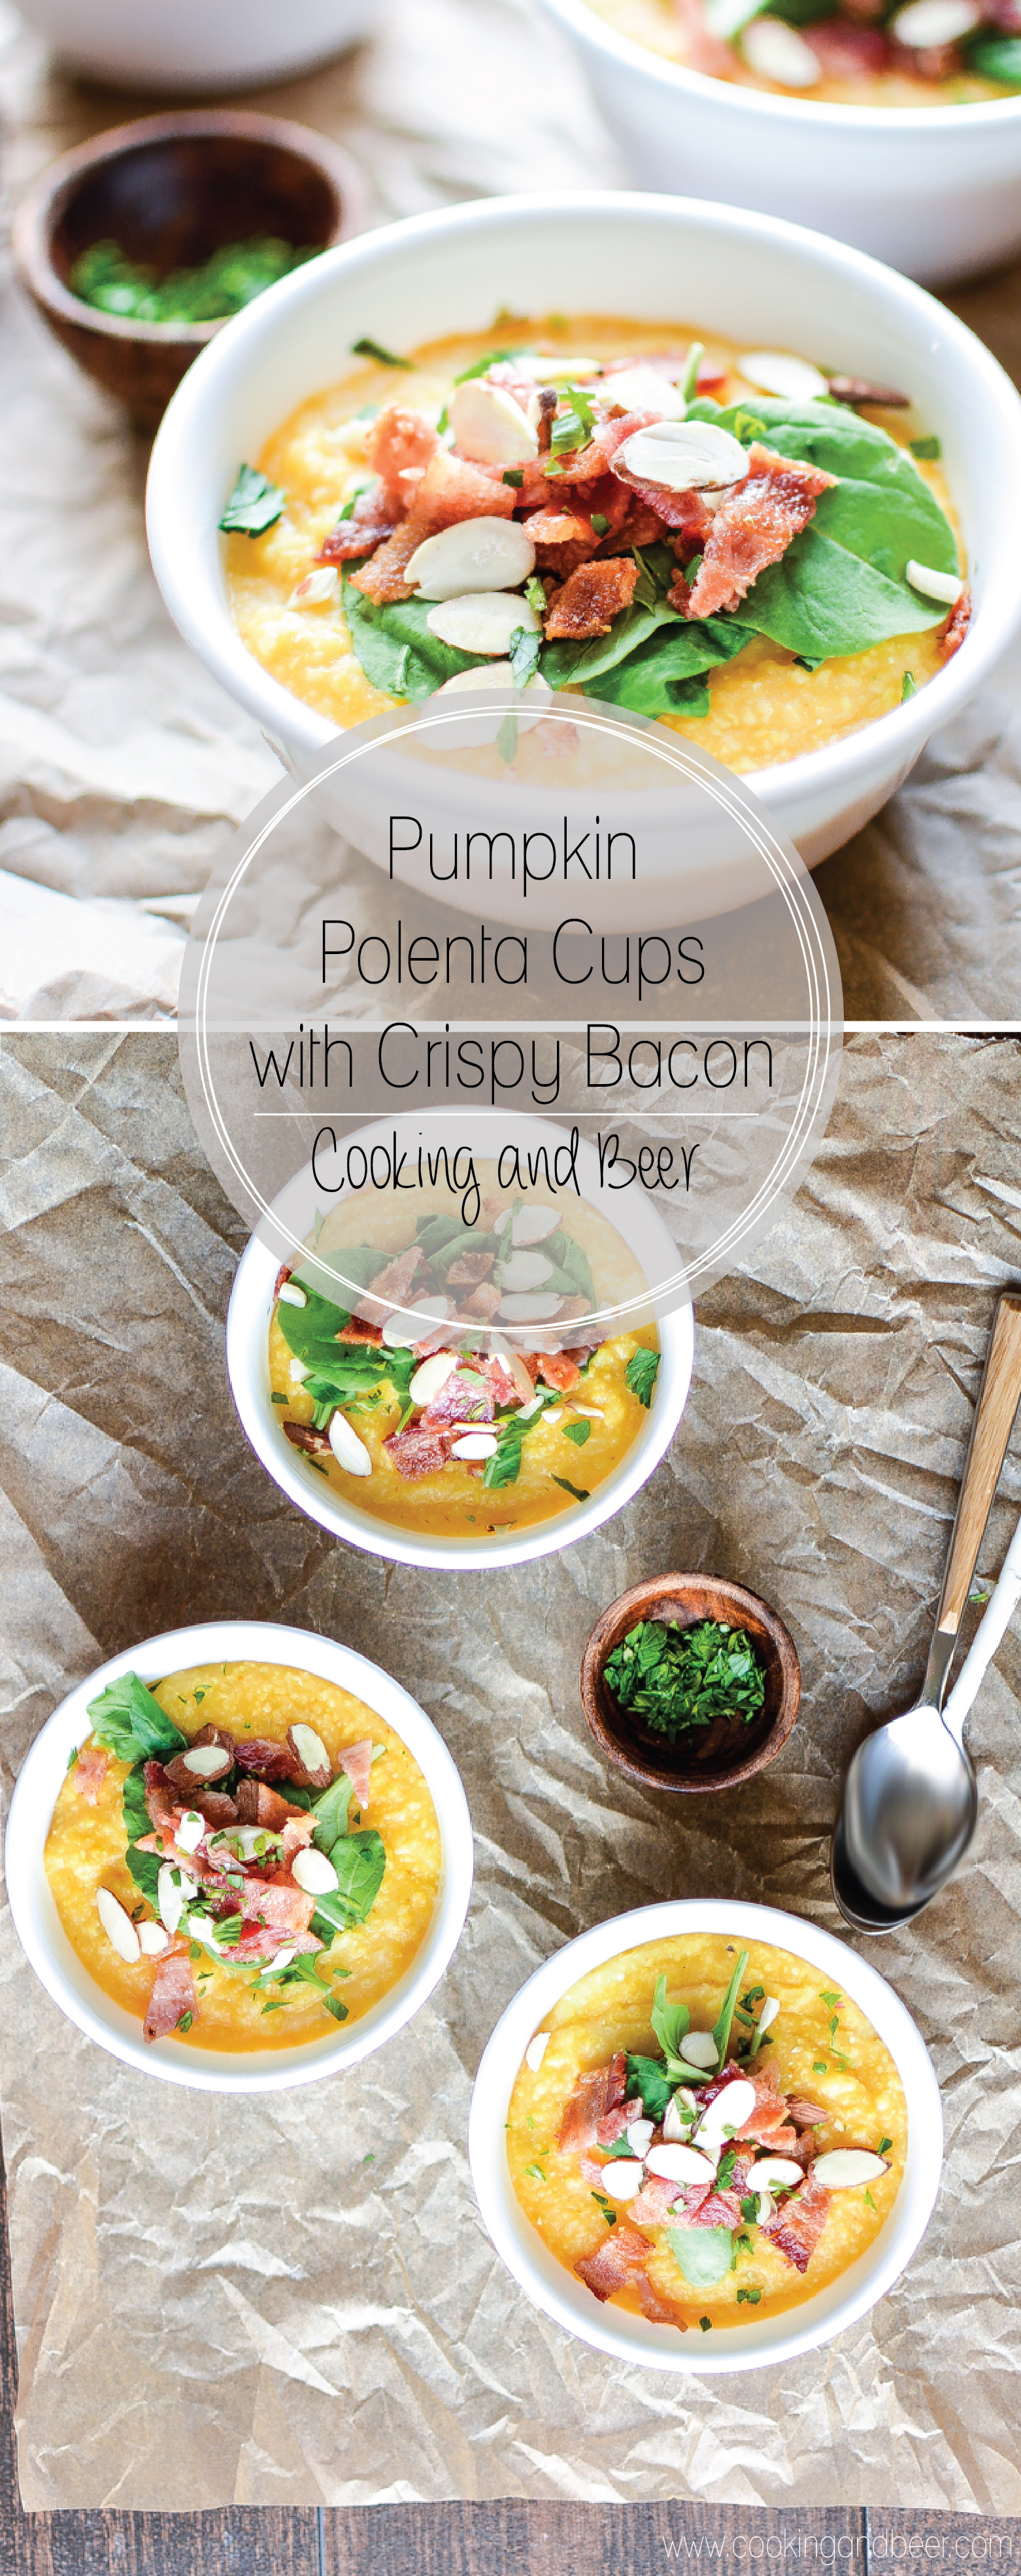 Pumpkin Polenta Cups are the perfect side dish recipe for your next party!